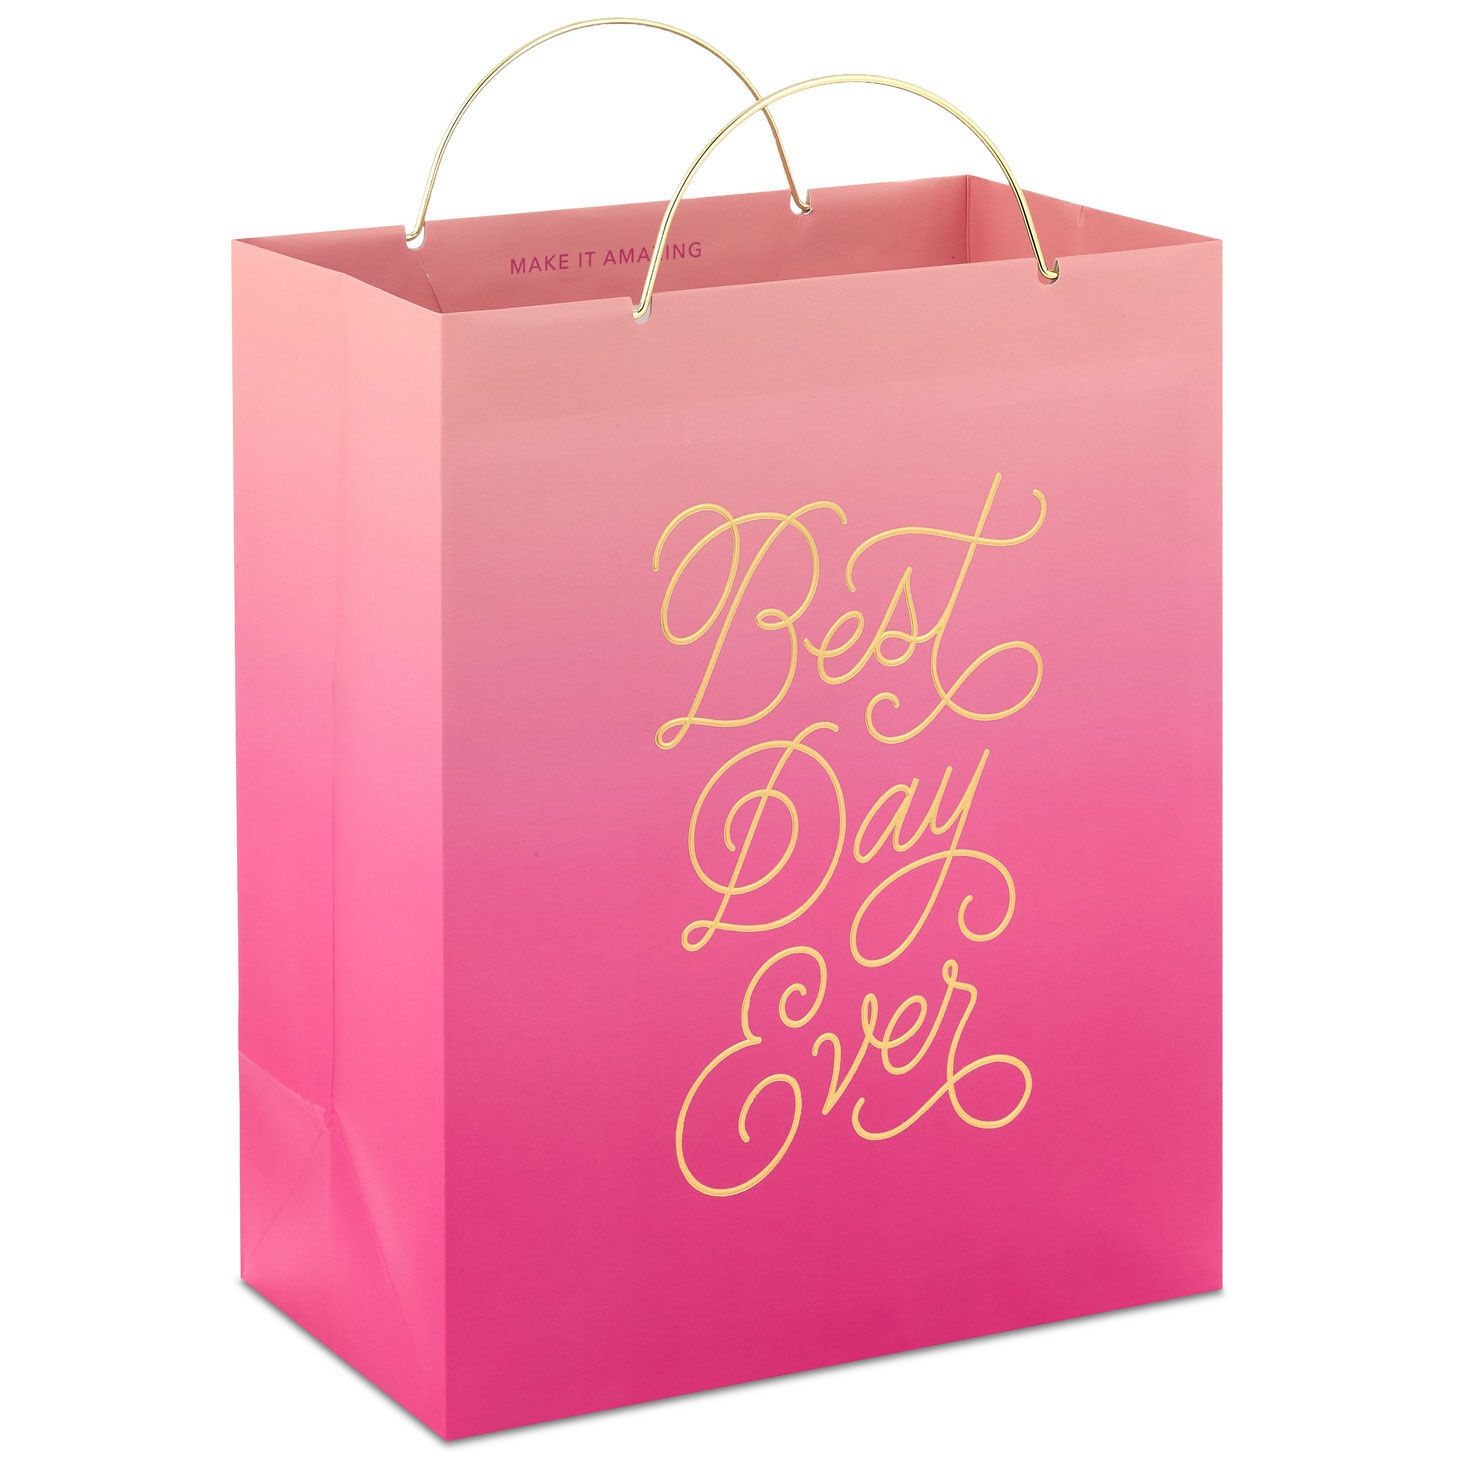 Hallmark 15 Extra Large Gift Bag with Tissue Paper (Pink Polka Dots and  Bow) for Birthdays, Easter, Baby Showers, Bridal Showers, Any Occasion